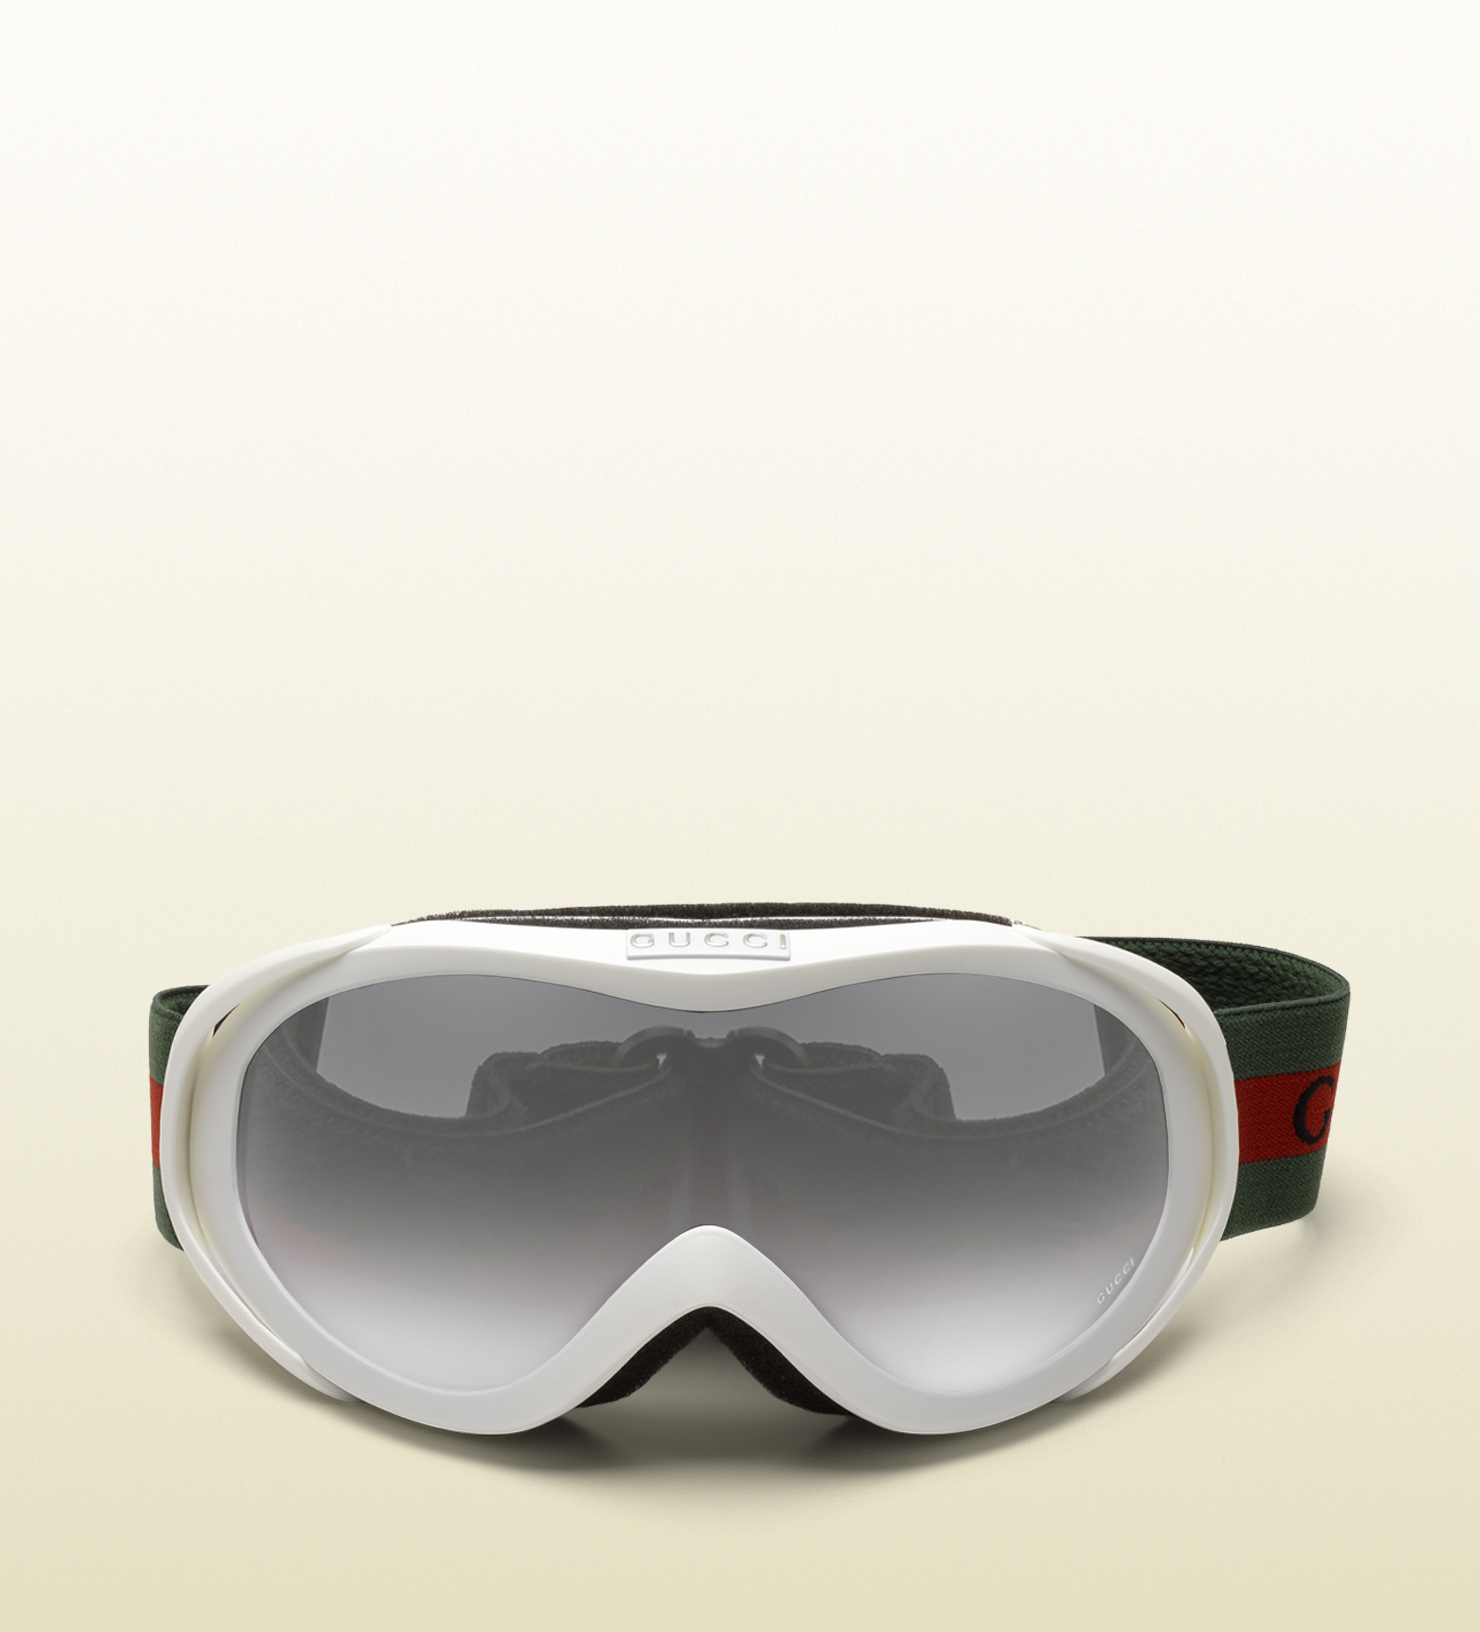 Gucci ski goggles in green injected